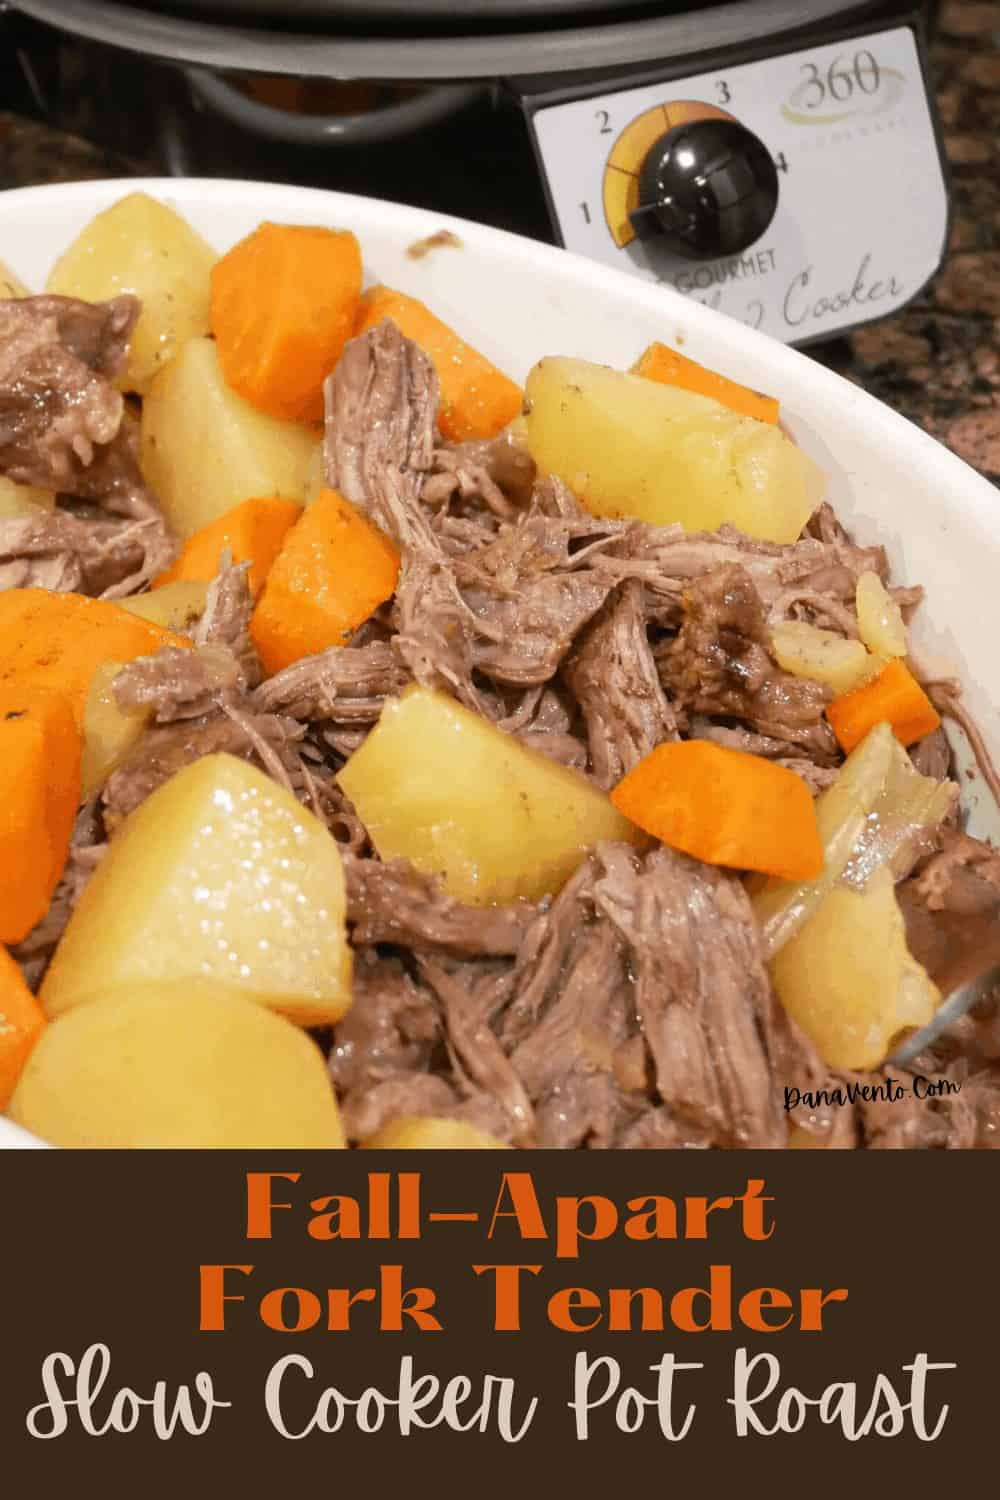 Pot roast with carrots and potatoes 